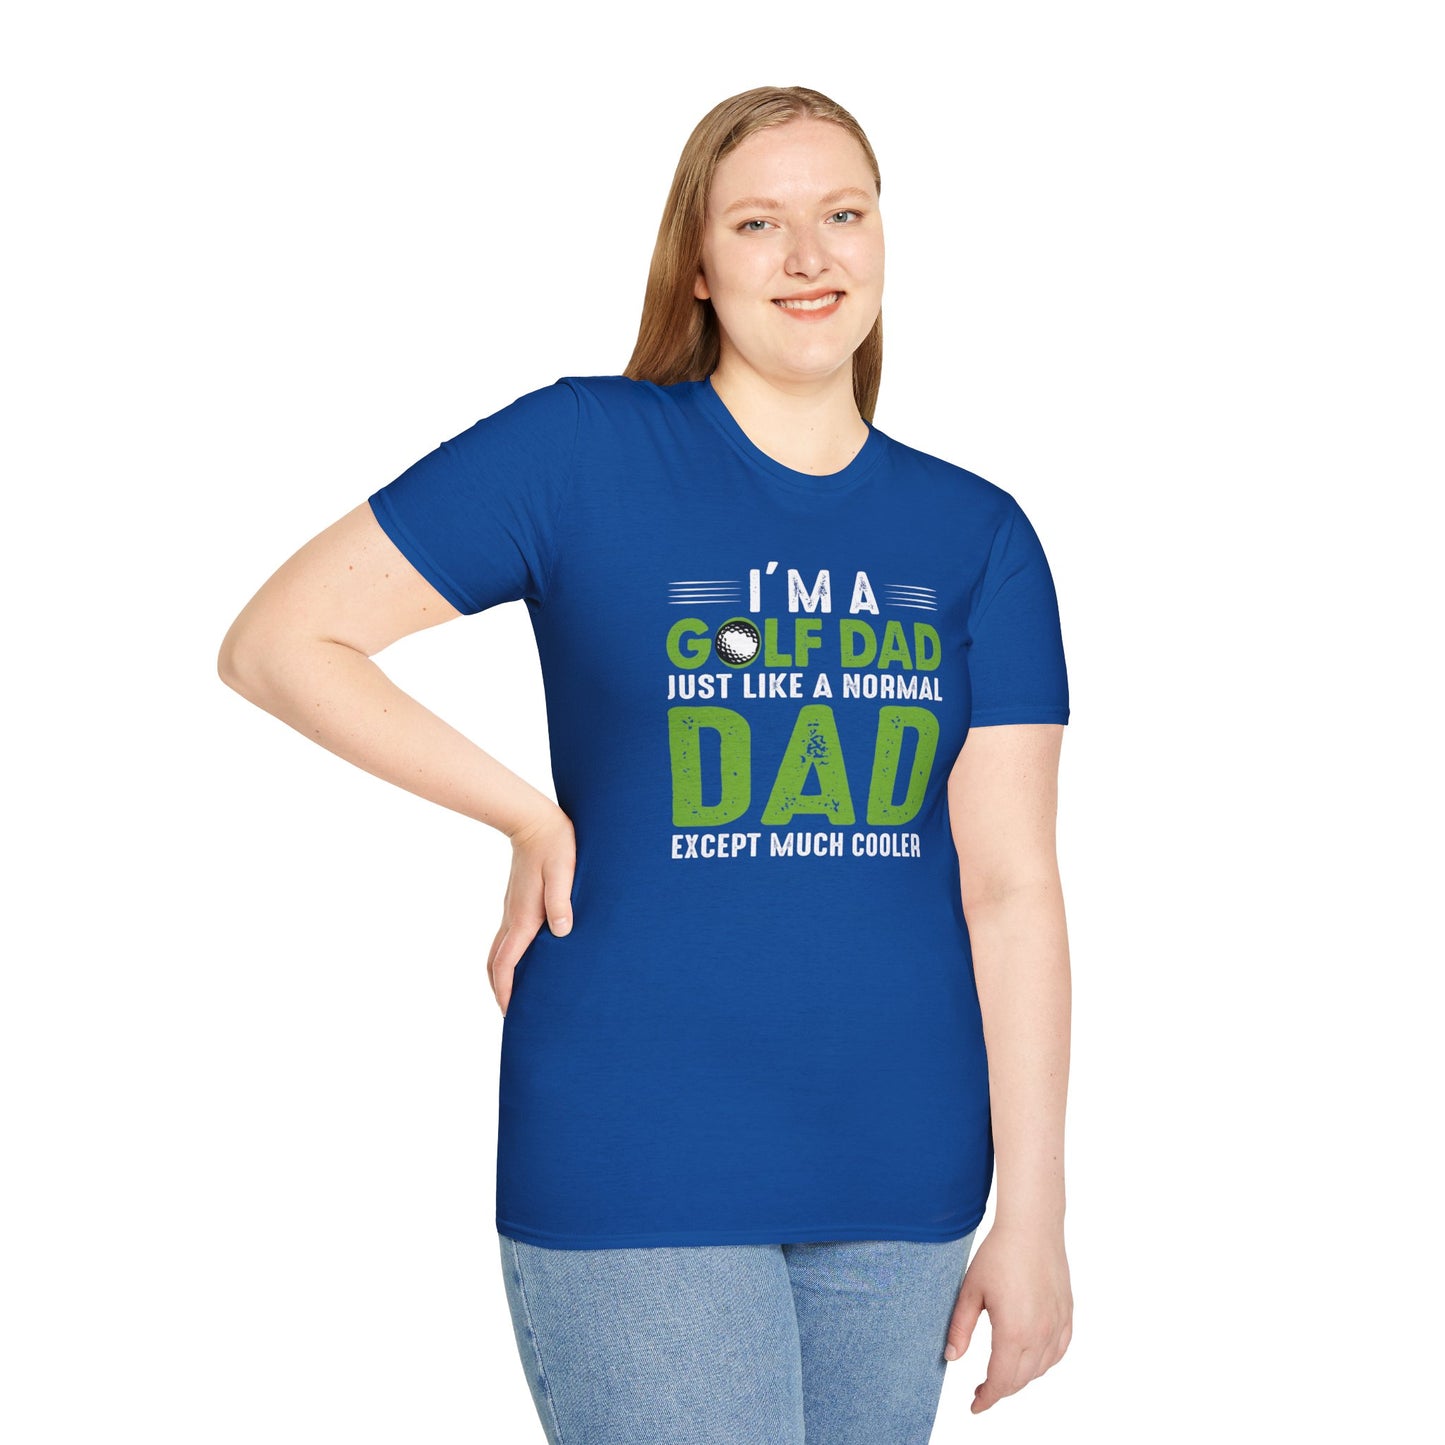 Cool Golf Dad Tee: Embrace Your Swing with Style